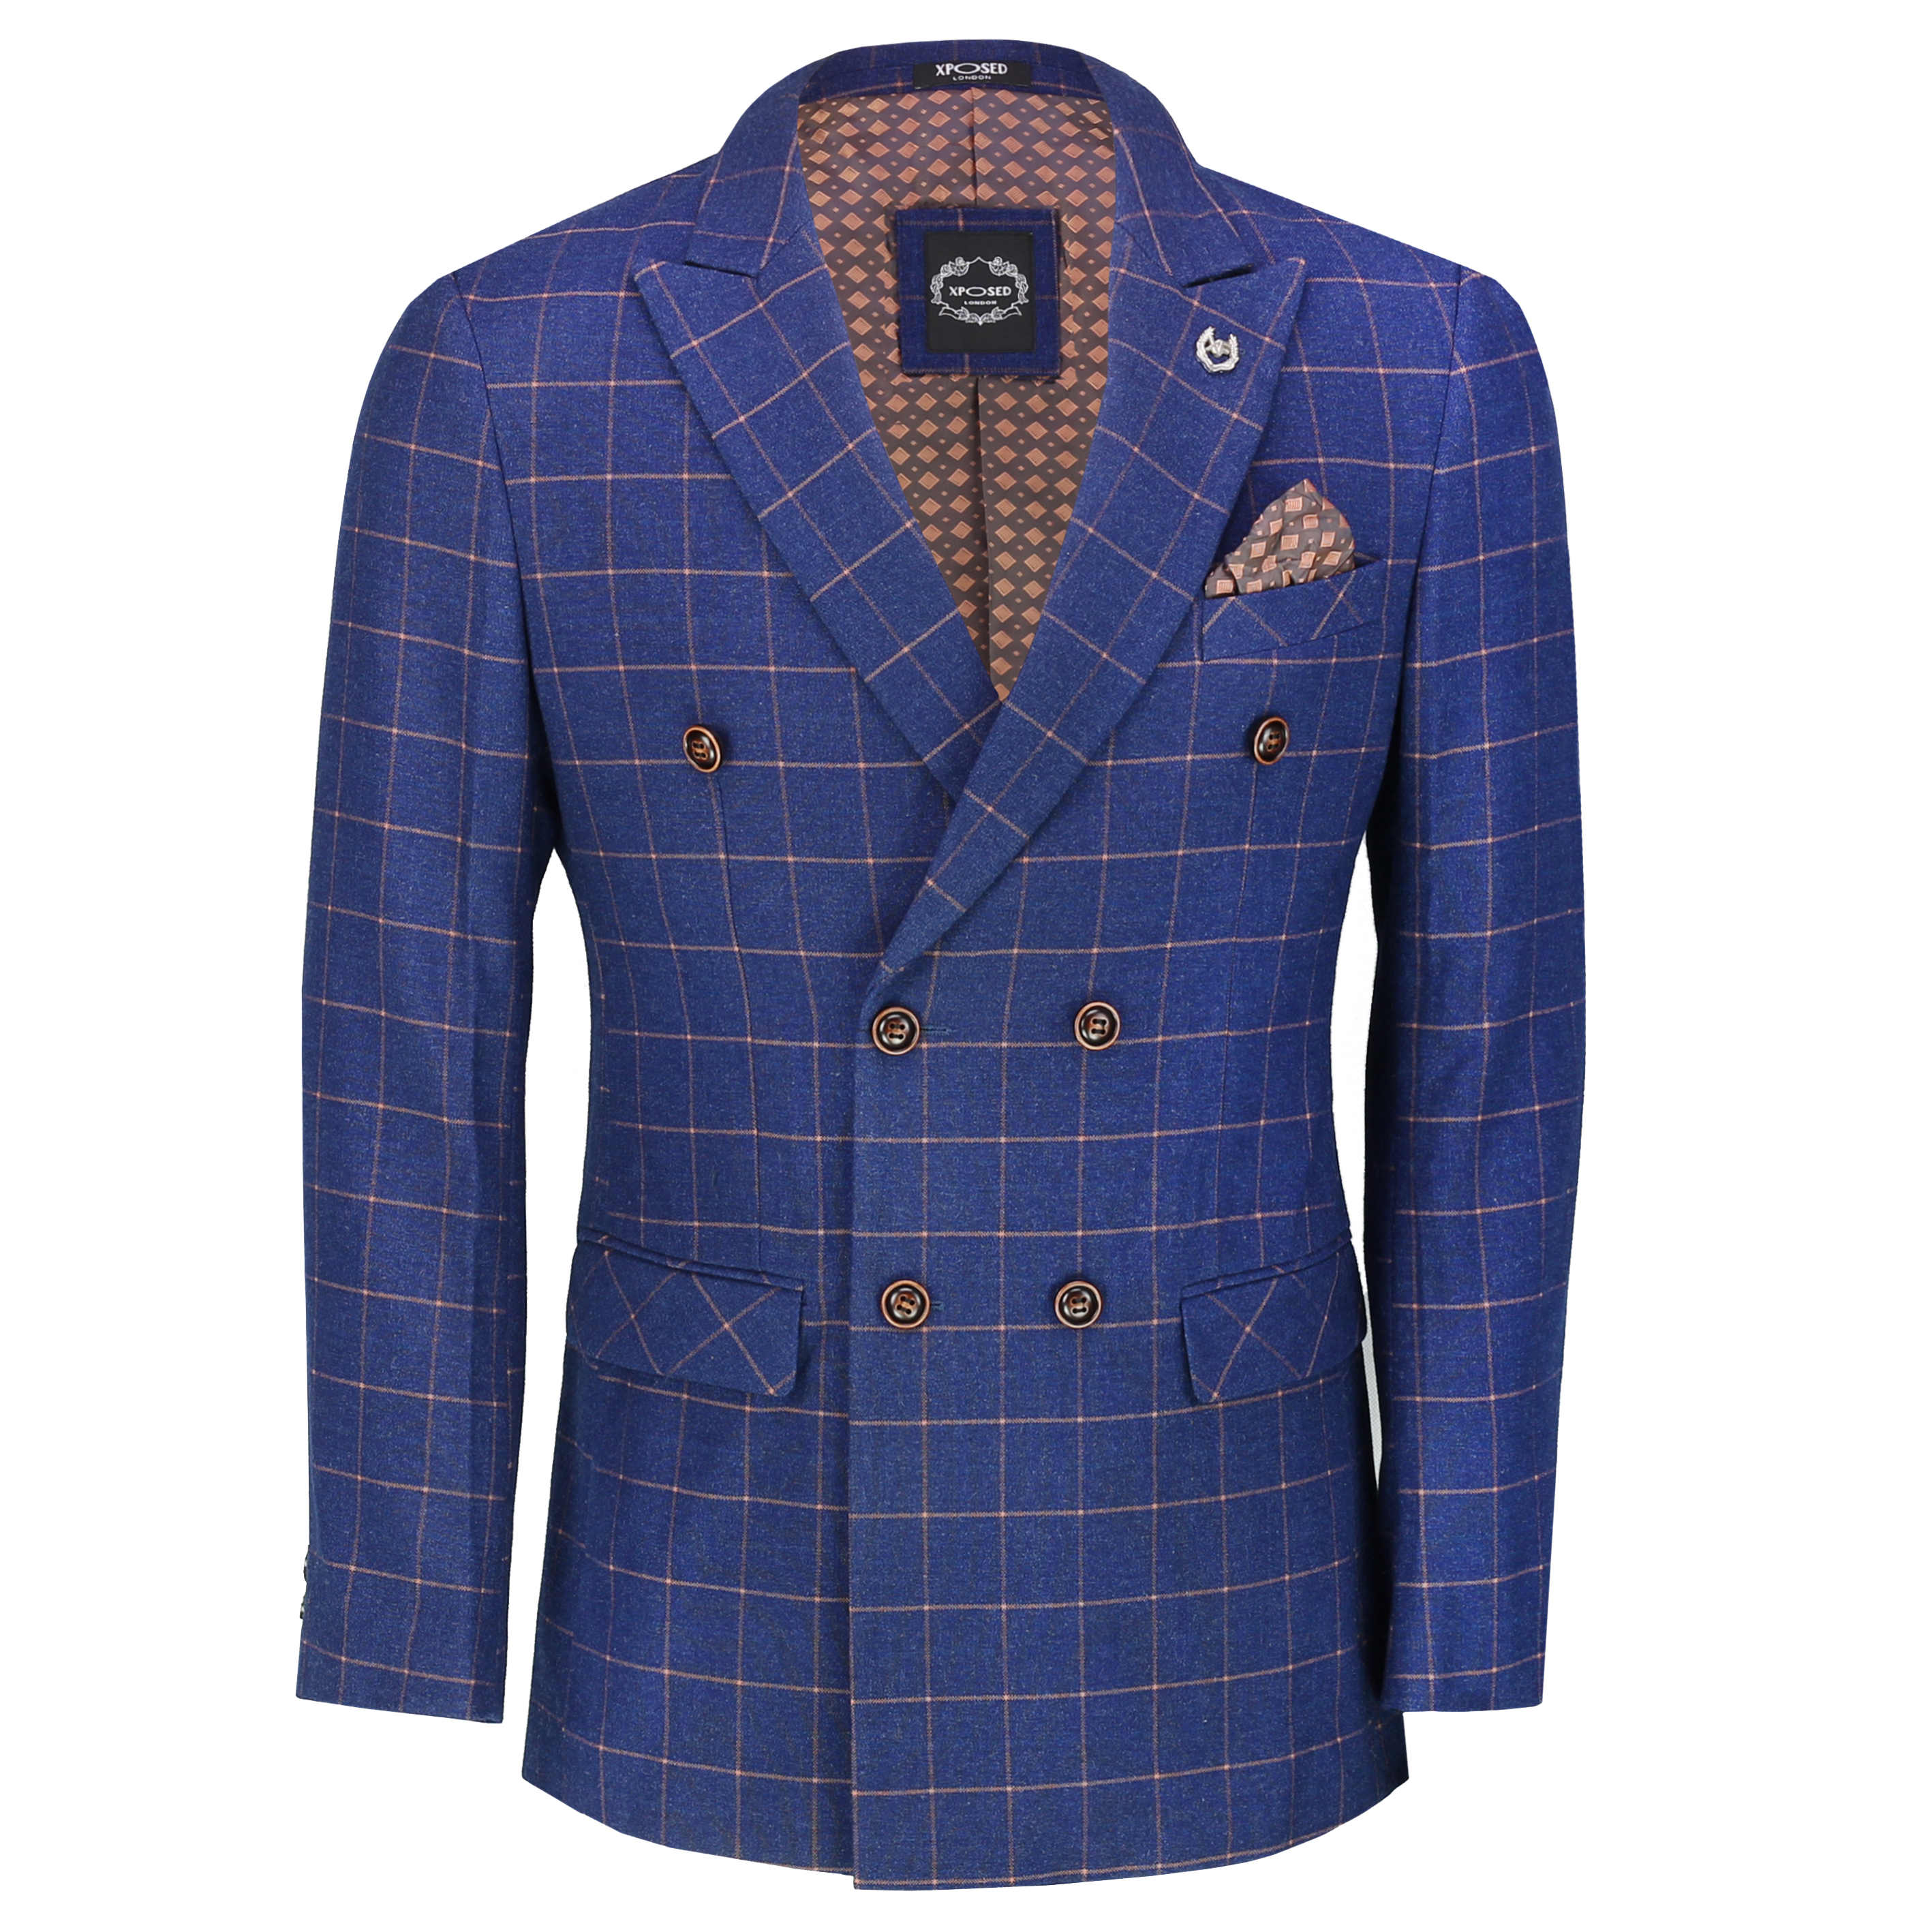 Mens Double Breasted Blazer Blue Windowpane Check Tailored Fit Suit Jacket